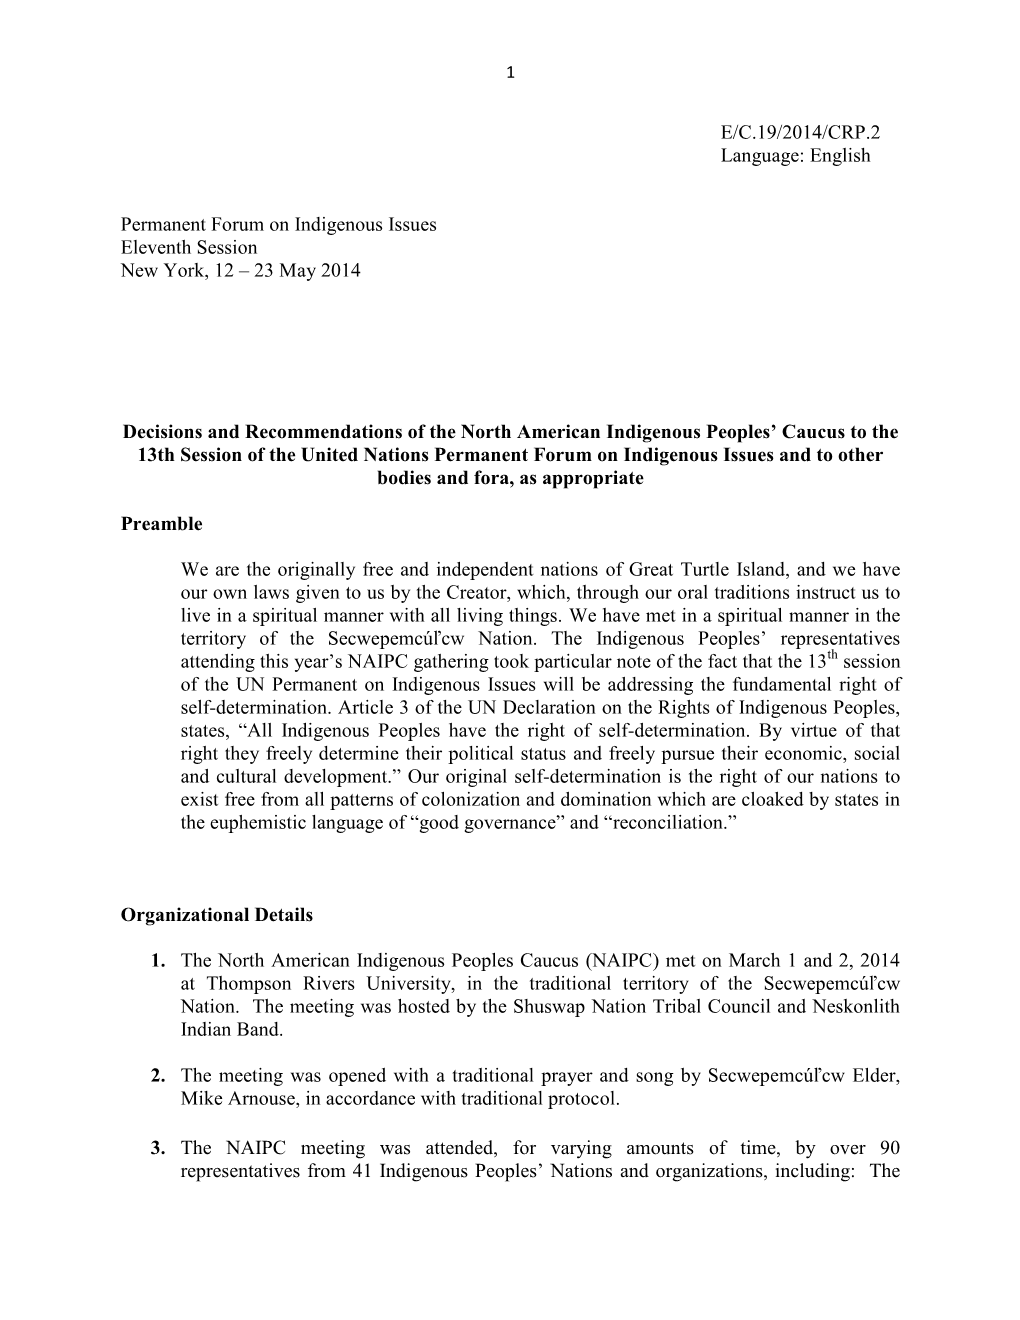 E/C.19/2014/CRP.2 Language: English Permanent Forum on Indigenous Issues Eleventh Session New York, 12 – 23 May 2014 Decisions